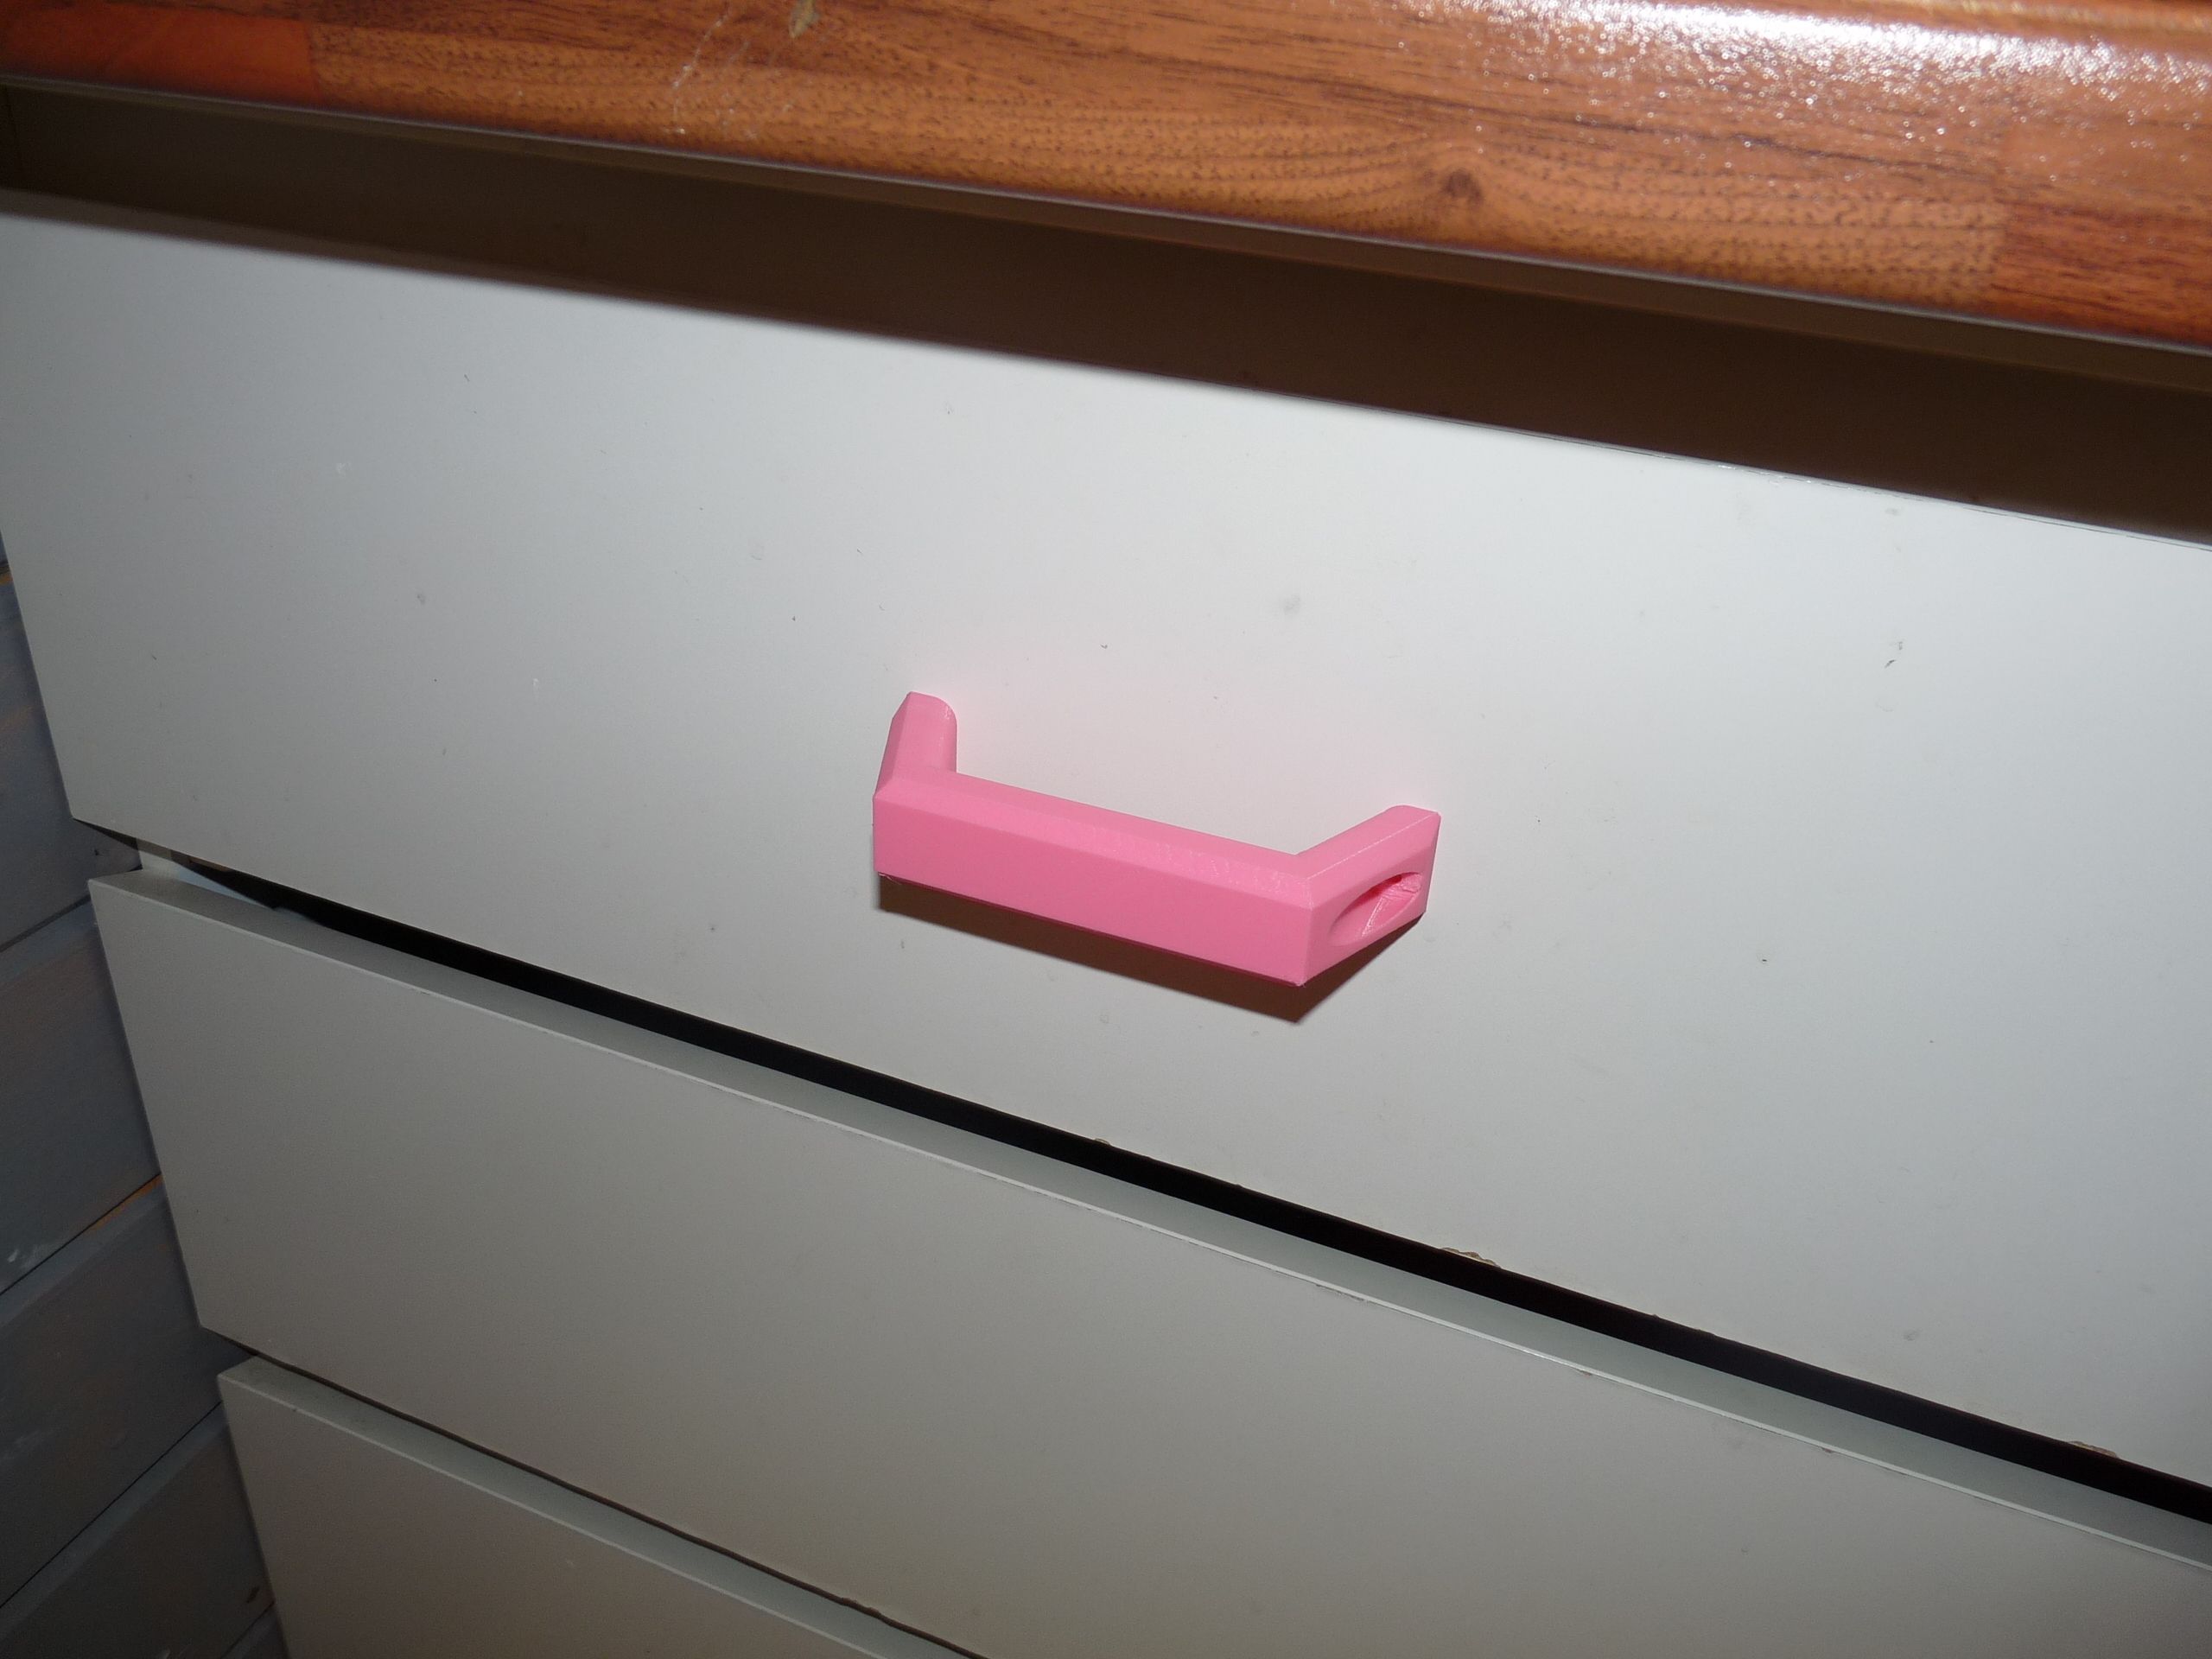 P1210327.JPG Download free STL file Sturdy handle for plaquard drawers • 3D printing template, Pachypodium